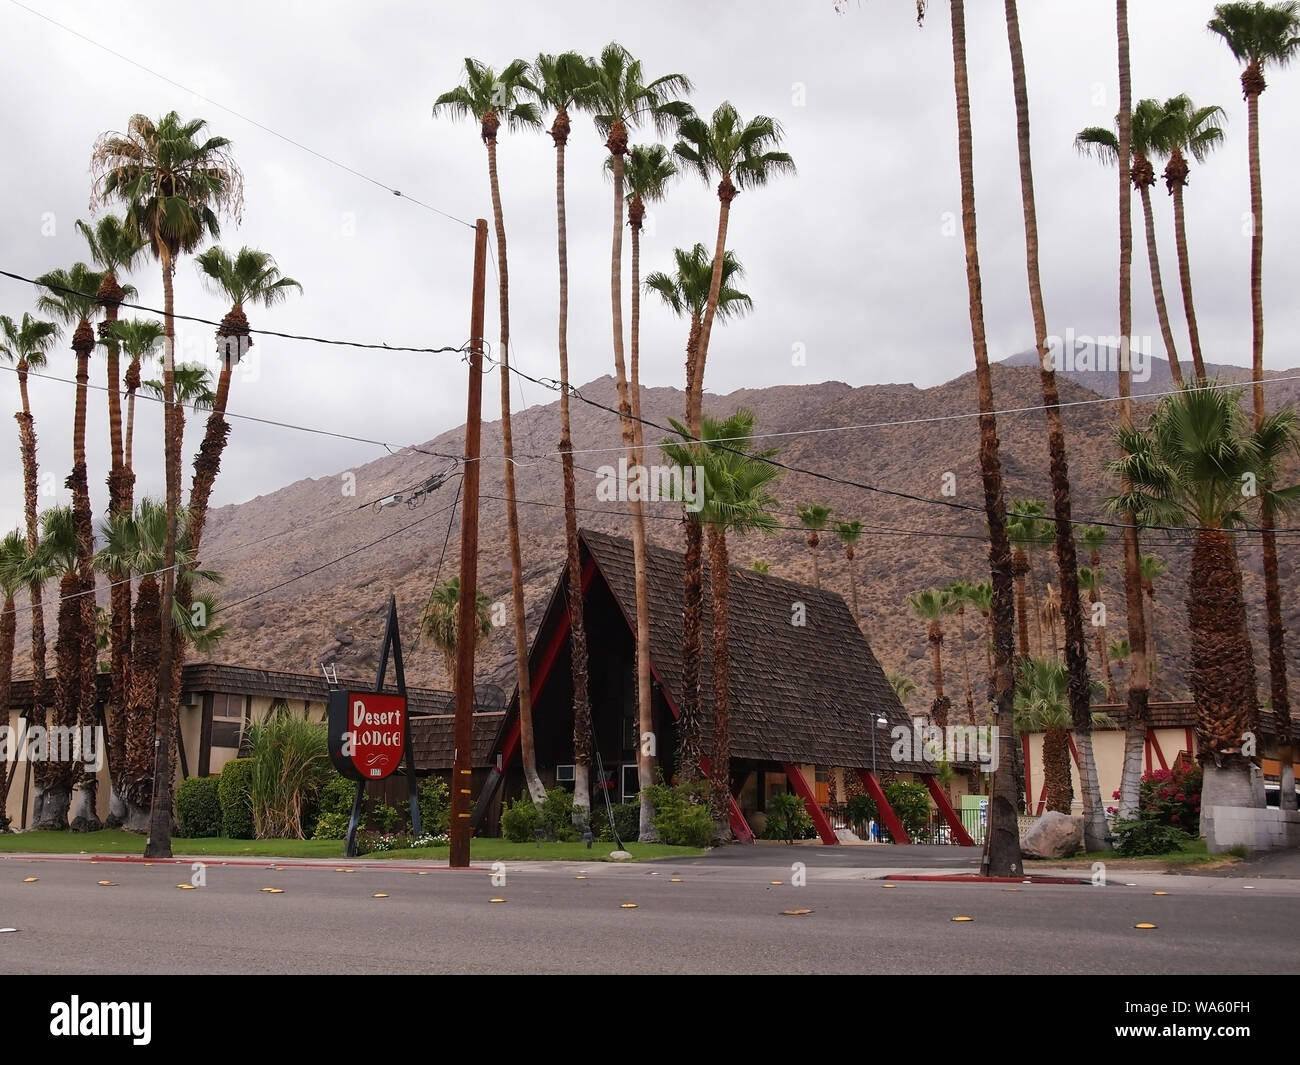 PALM SPRINGS, CALIFORNIA - JULY 18, 2018: The Desert Lodge hotel, featuring a classic mid century A Frame structure, was built around 1963 and origina Stock Photo